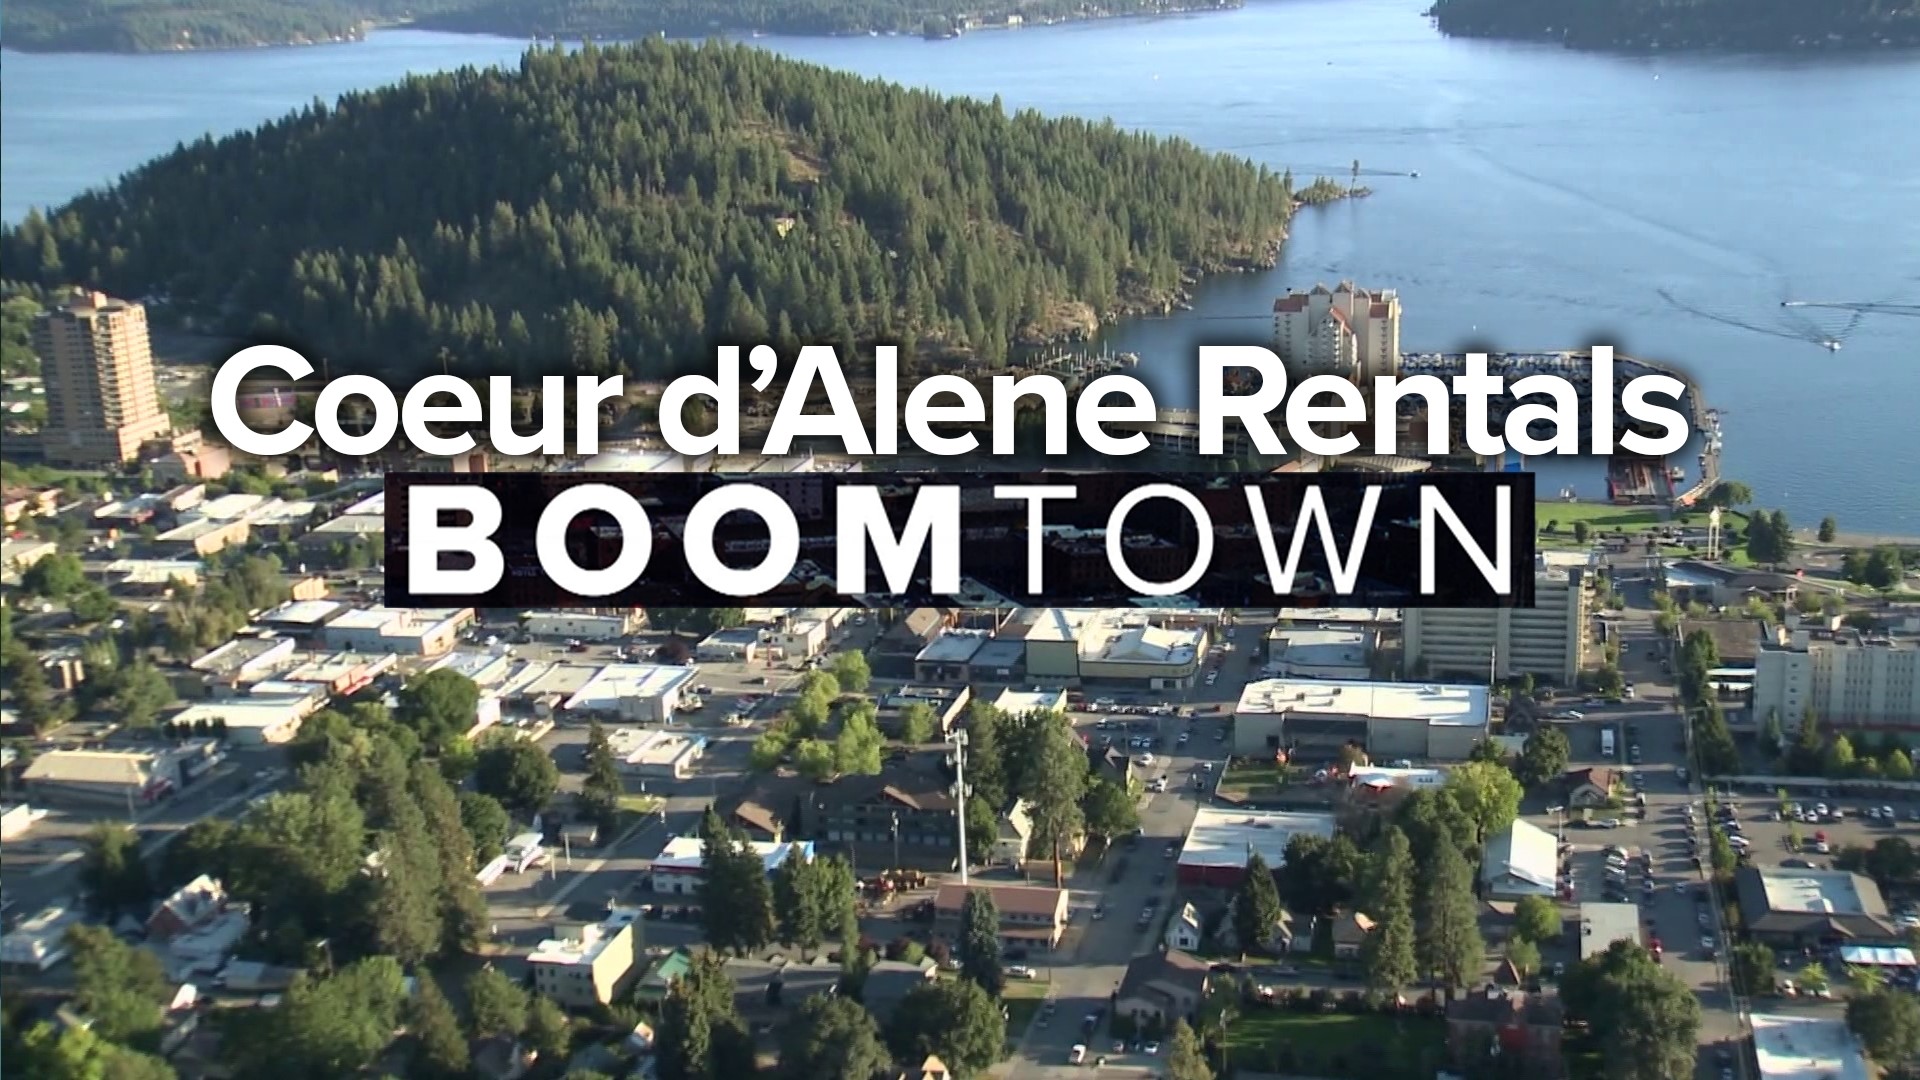 Coeur D'Alene passed a proposal to hire a company to oversee vacation rentals. There are over 700 illegal short-term rentals the city wants to eliminate.